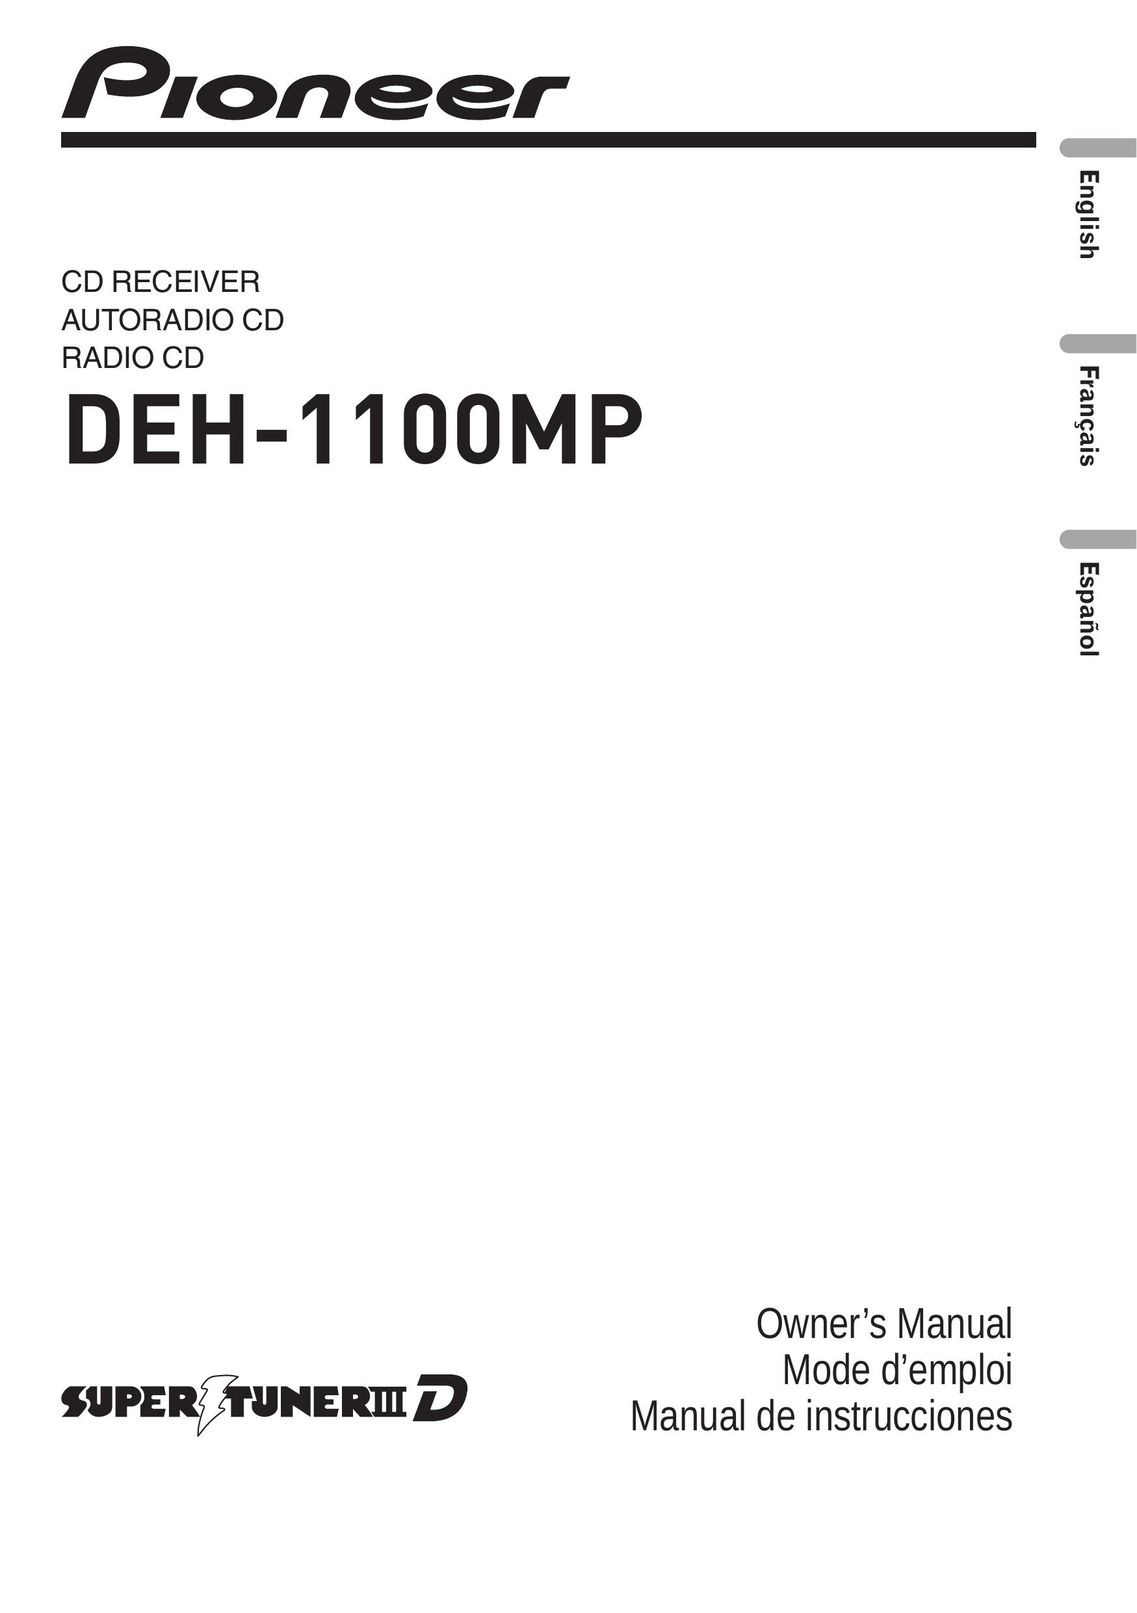 Pioneer DEH-1100MP Car Stereo System User Manual